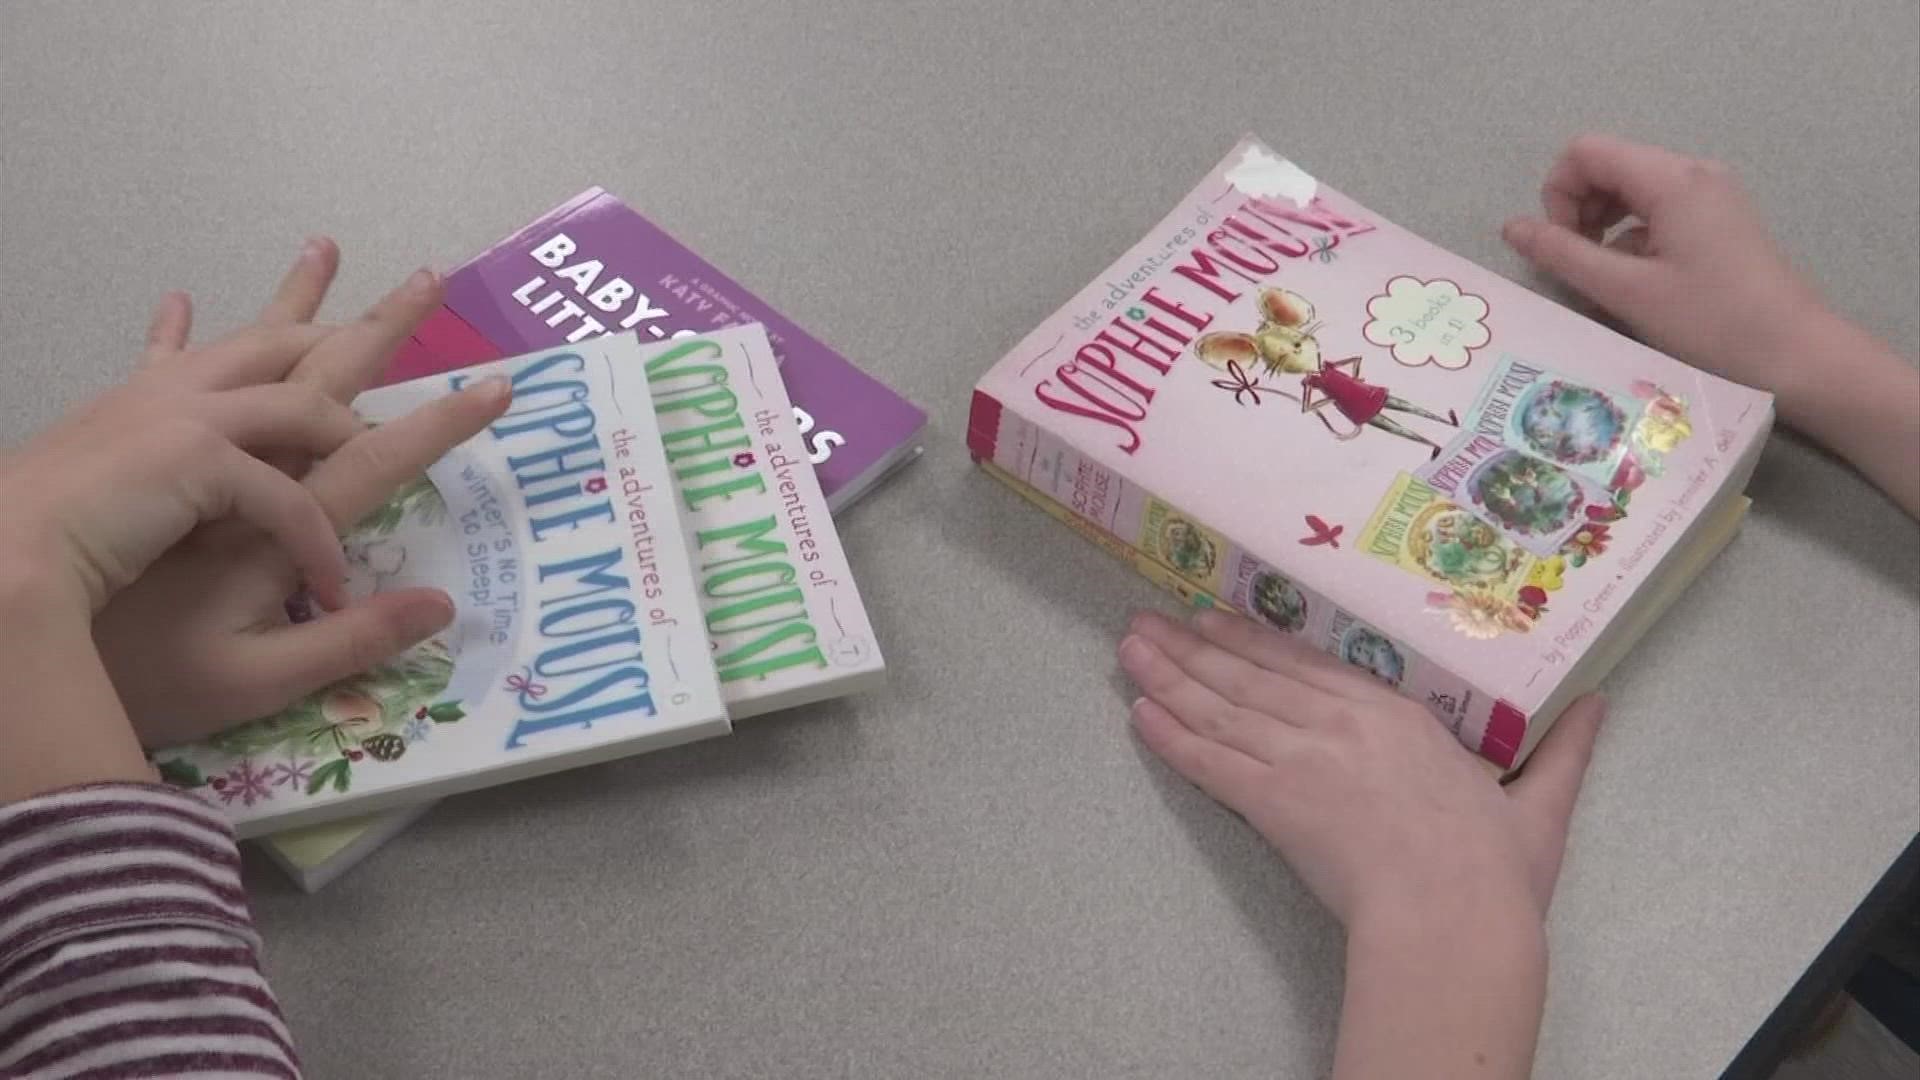 When the pandemic hit, a group of 3rd graders in Gahanna decided to get creative and start their own book club.